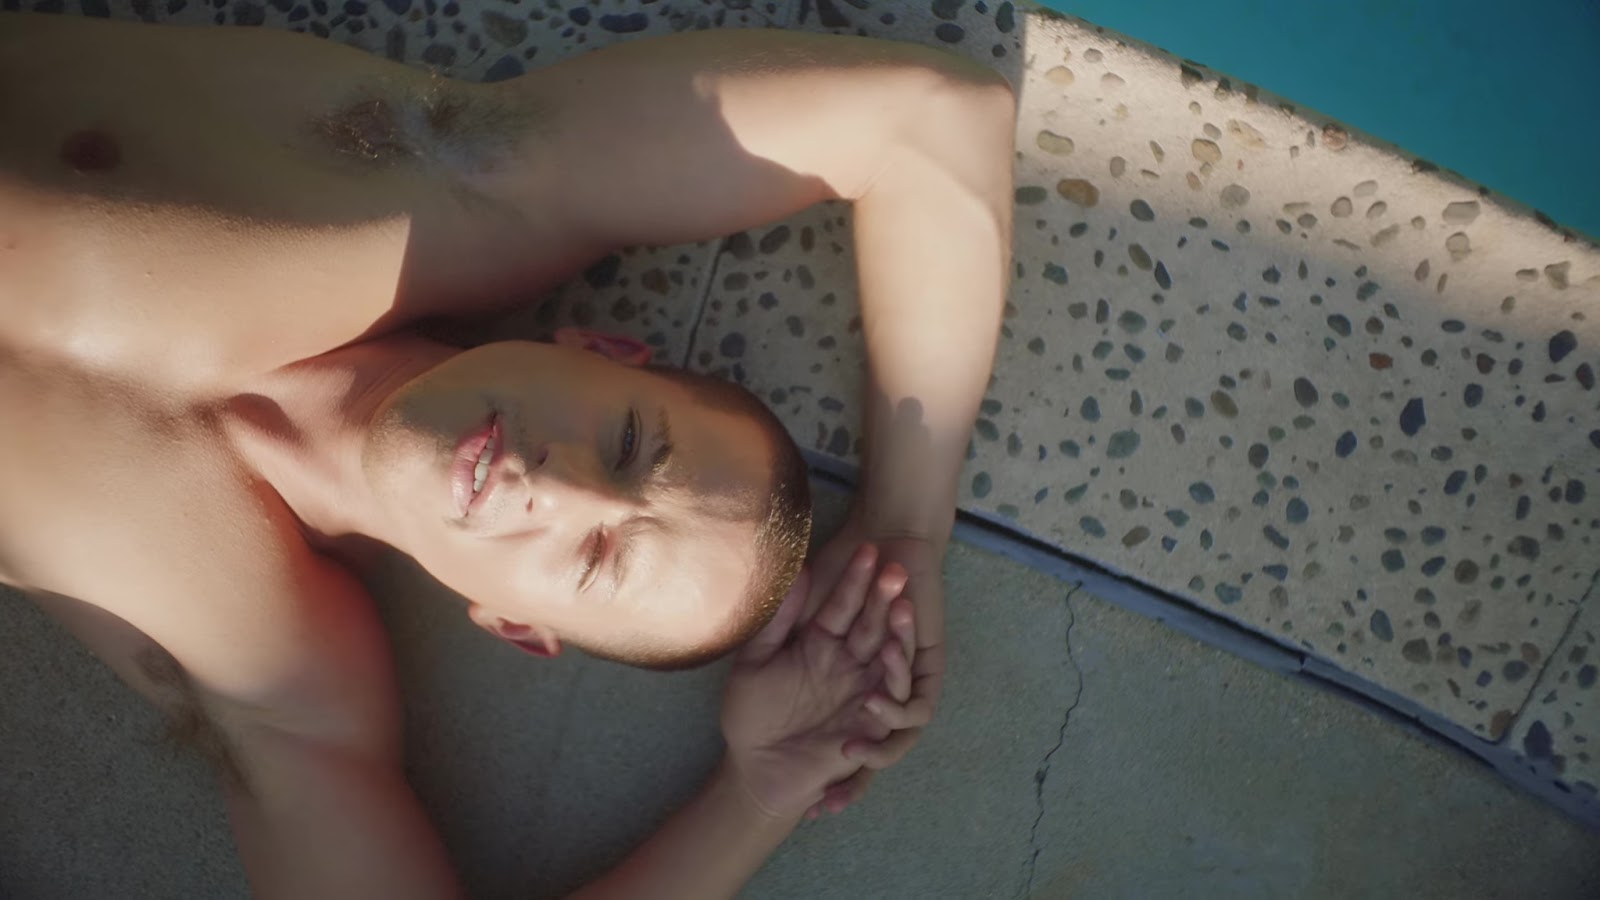 Charlie Puth shirtless in Mother music video.